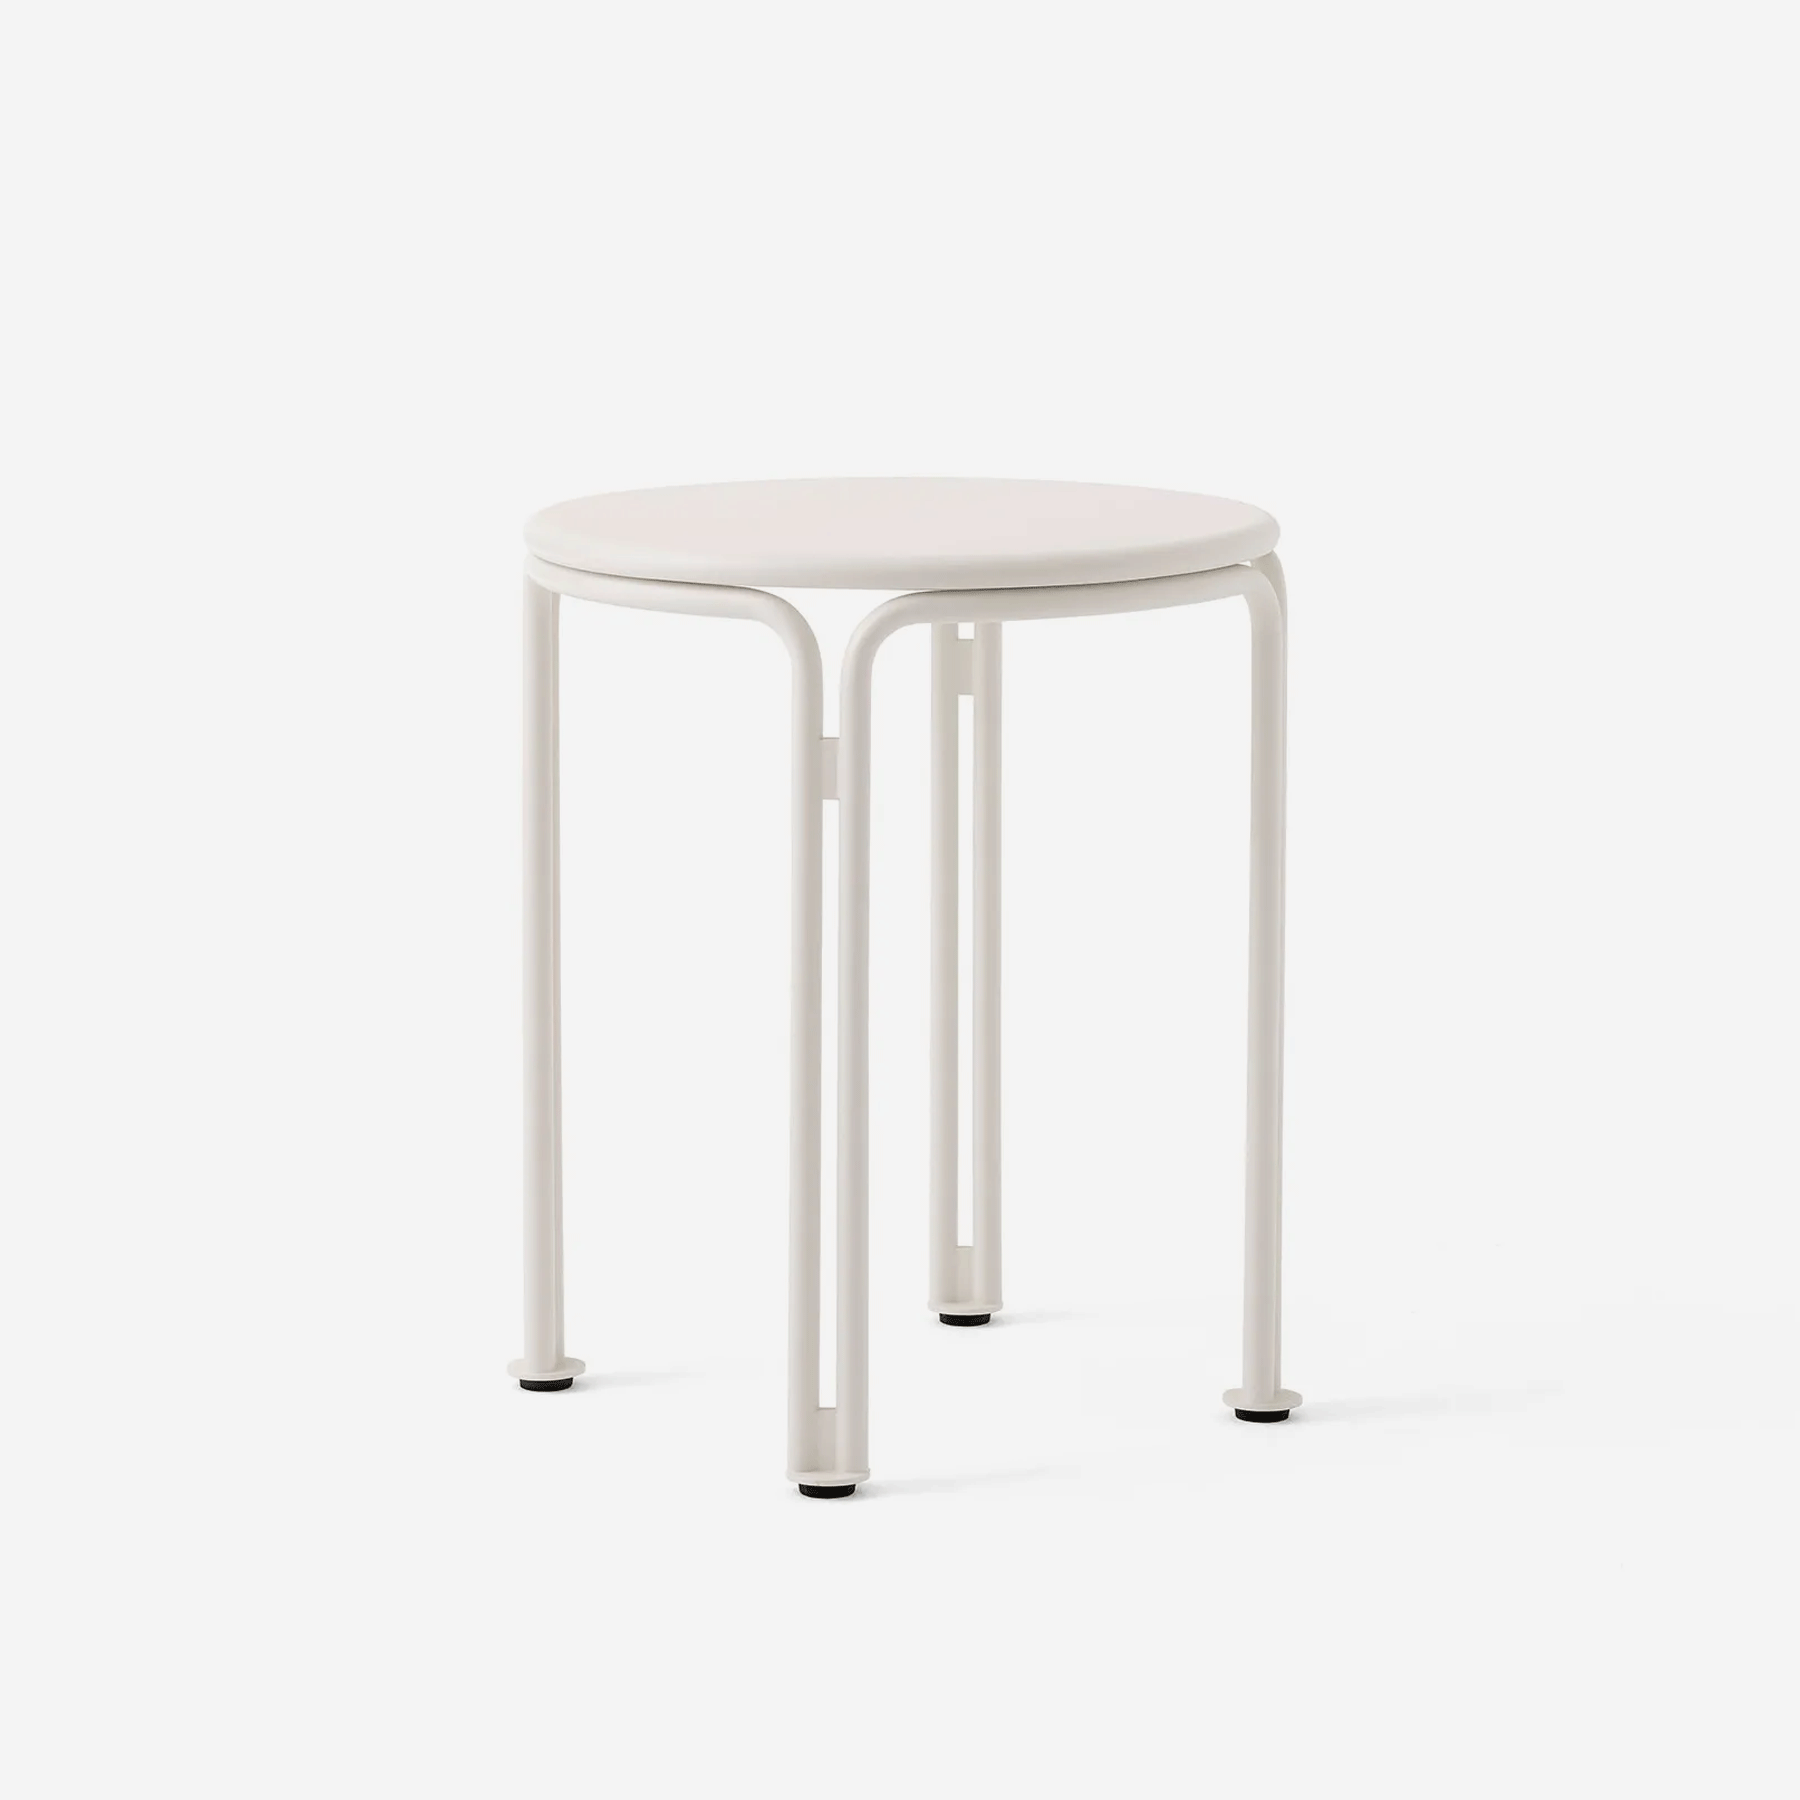 Thorvald SC102 Outdoor side table